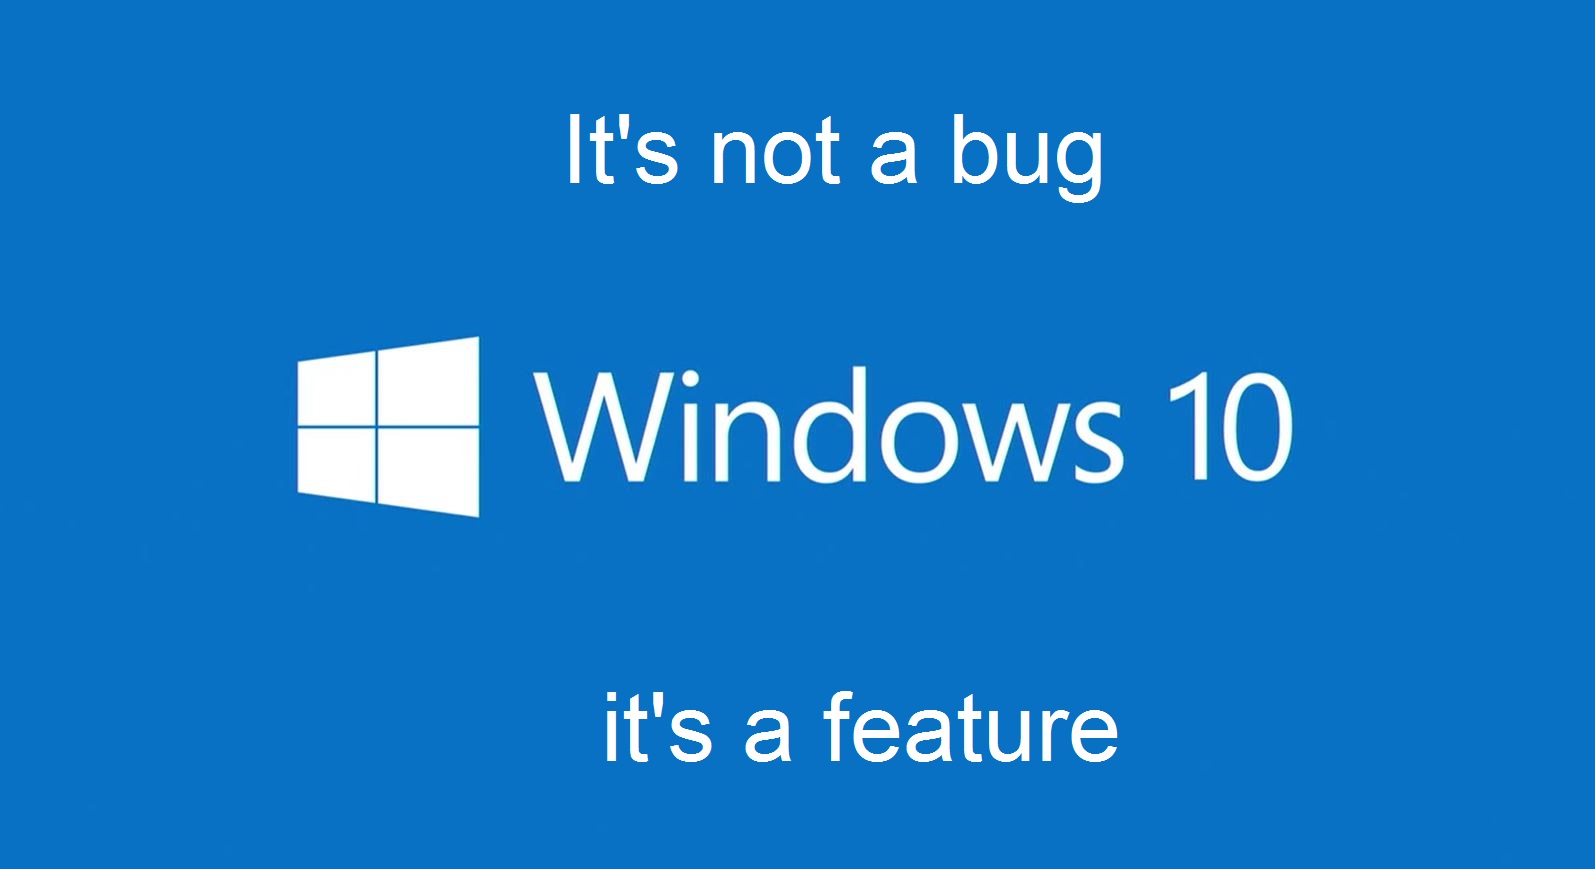 Windows 10 Update 1607: A Test of Patience